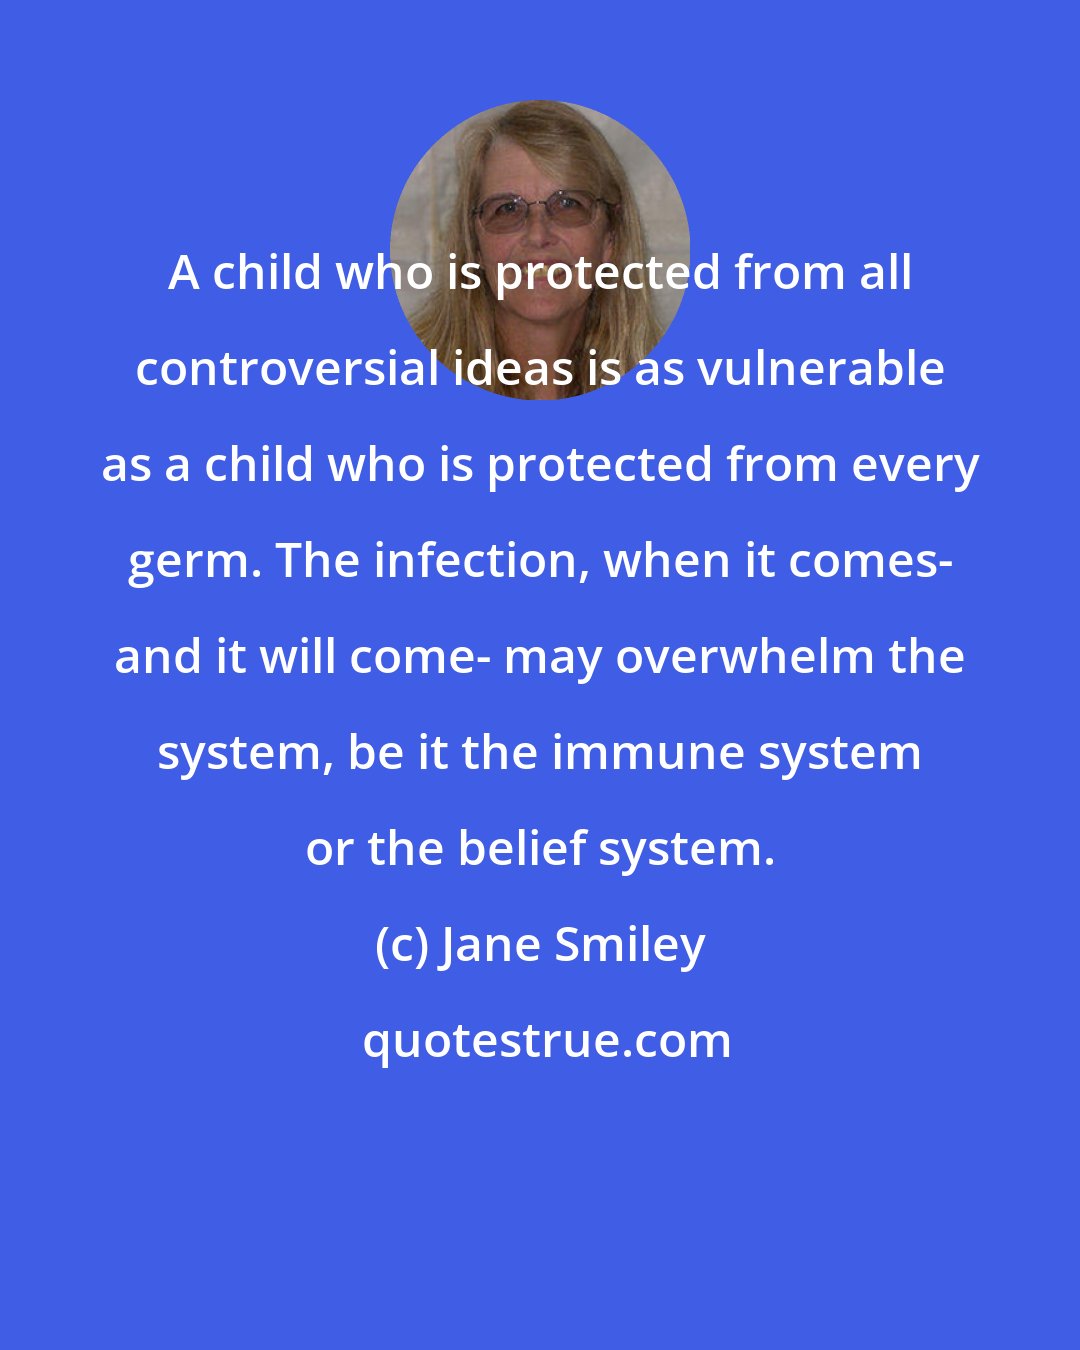 Jane Smiley: A child who is protected from all controversial ideas is as vulnerable as a child who is protected from every germ. The infection, when it comes- and it will come- may overwhelm the system, be it the immune system or the belief system.